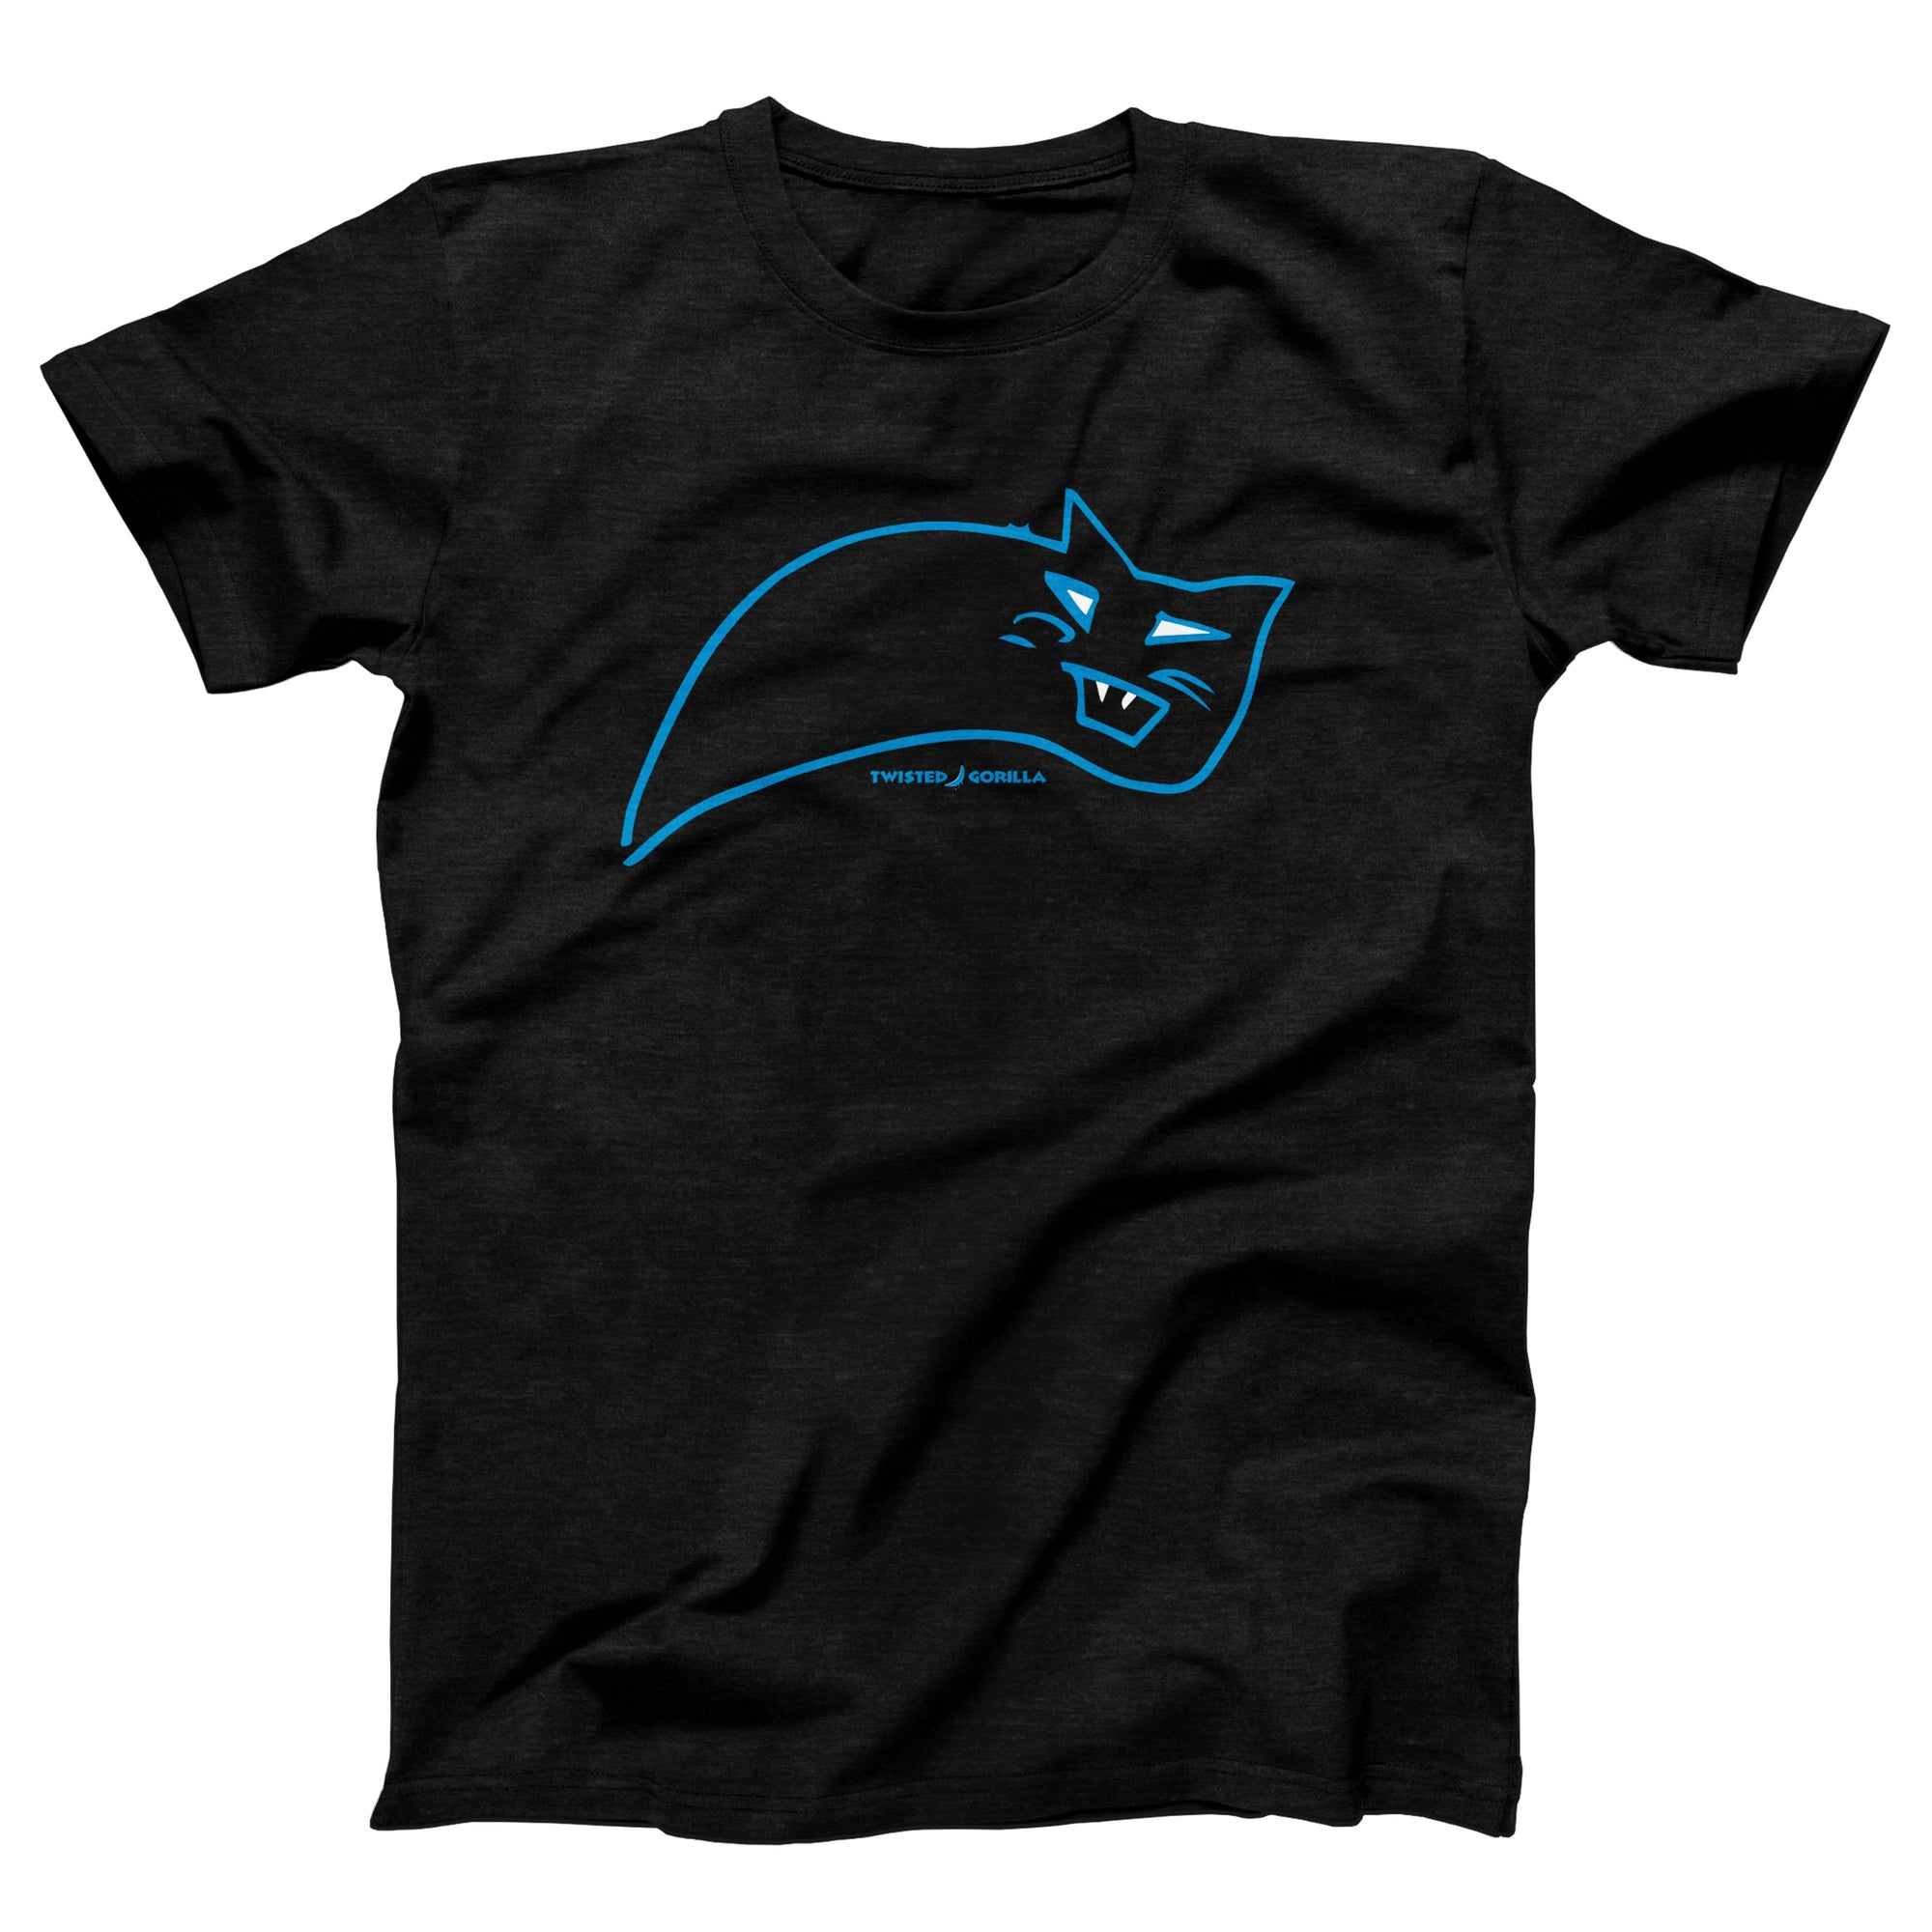 Darnold Panther Adult Unisex T-Shirt - Twisted Gorilla